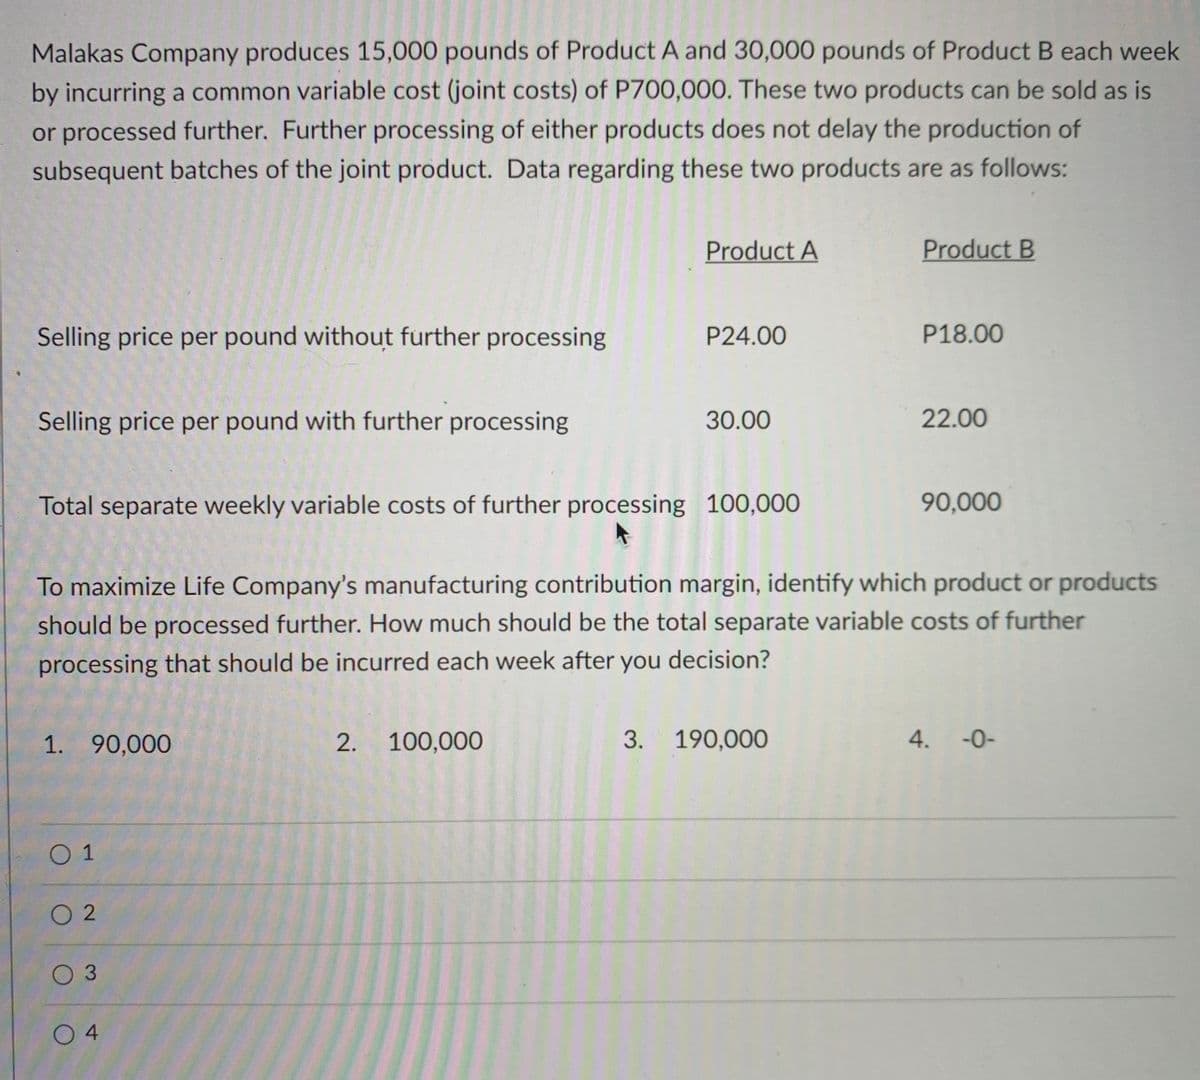 Malakas Company produces 15,000 pounds of Product A and 30,000 pounds of Product B each week
by incurring a common variable cost (joint costs) of P700,000. These two products can be sold as is
or processed further. Further processing of either products does not delay the production of
subsequent batches of the joint product. Data regarding these two products are as follows:
Product A
Product B
Selling price per pound without further processing
P24.00
P18.00
Selling price per pound with further processing
30.00
22.00
Total separate weekly variable costs of further processing 100,000
90,000
To maximize Life Company's manufacturing contribution margin, identify which product or products
should be processed further. How much should be the total separate variable costs of further
processing that should be incurred each week after you decision?
1. 90,000
2. 100,000
3. 190,000
4. -0-
0 1
O 2
03
O 4
